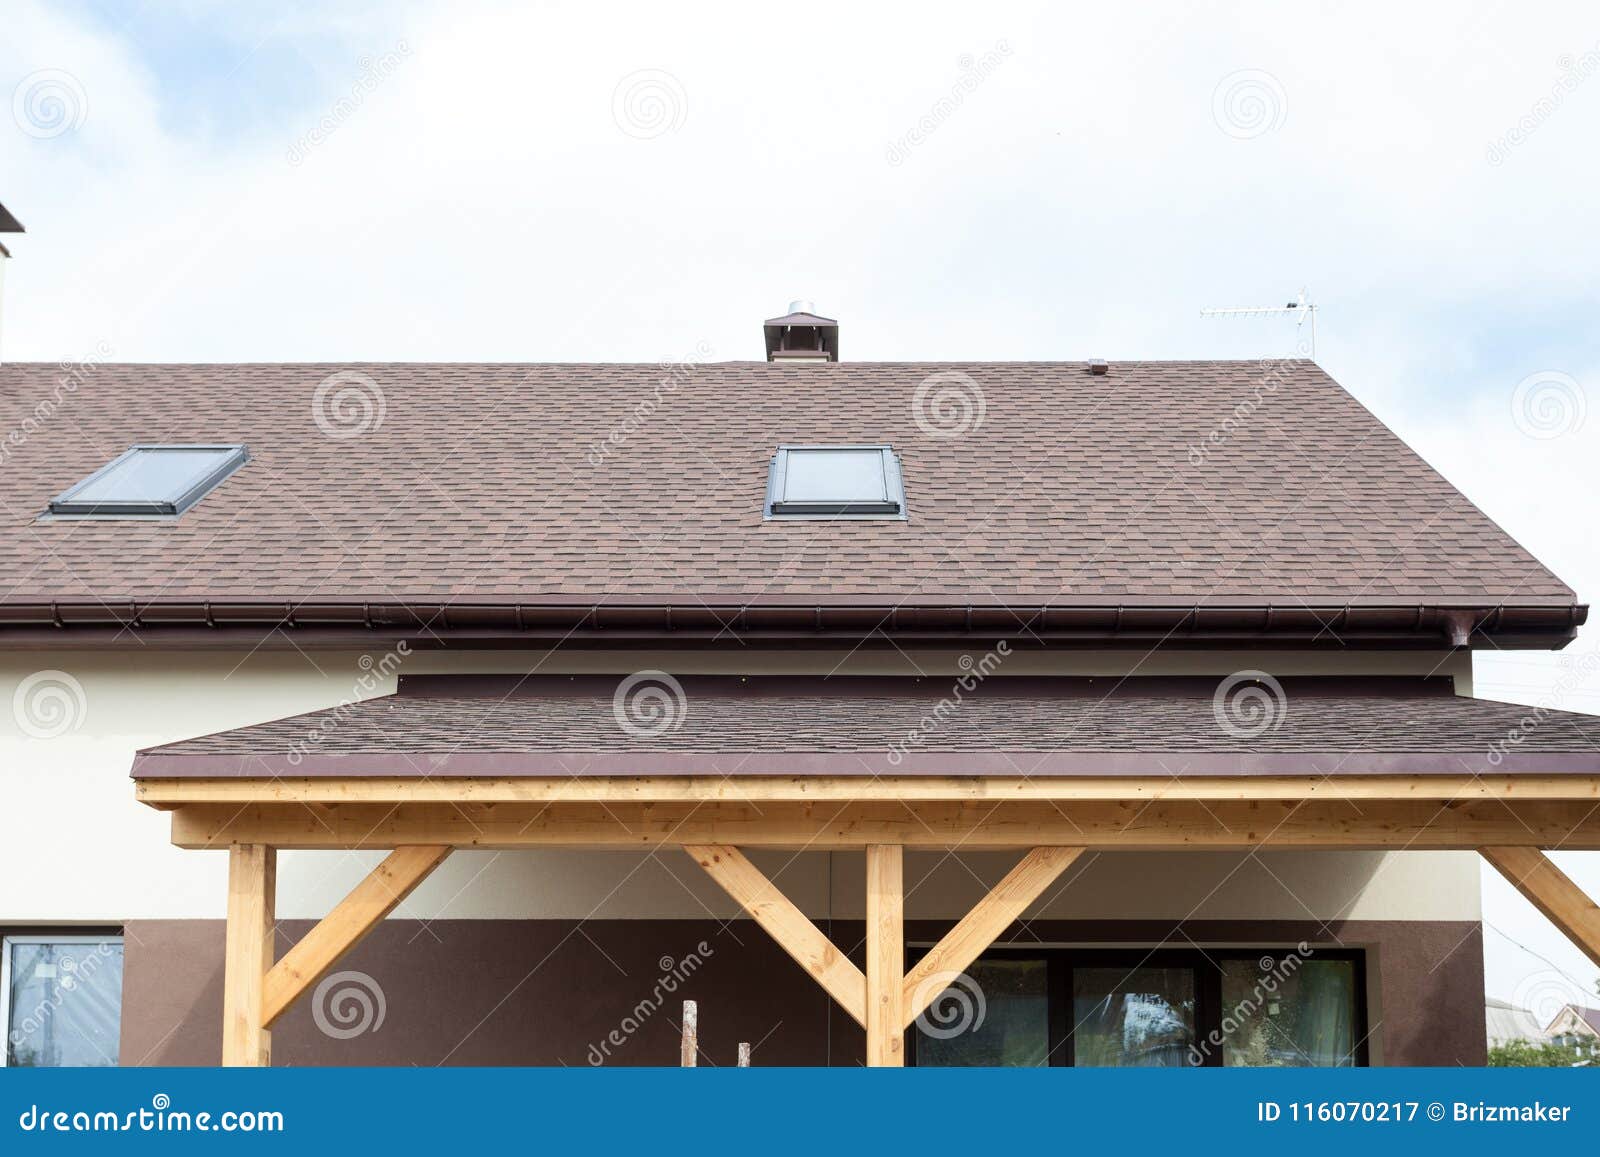 Roofing Construction And Building New House With Modular Chimney, Skylights, Attic, Dormers And